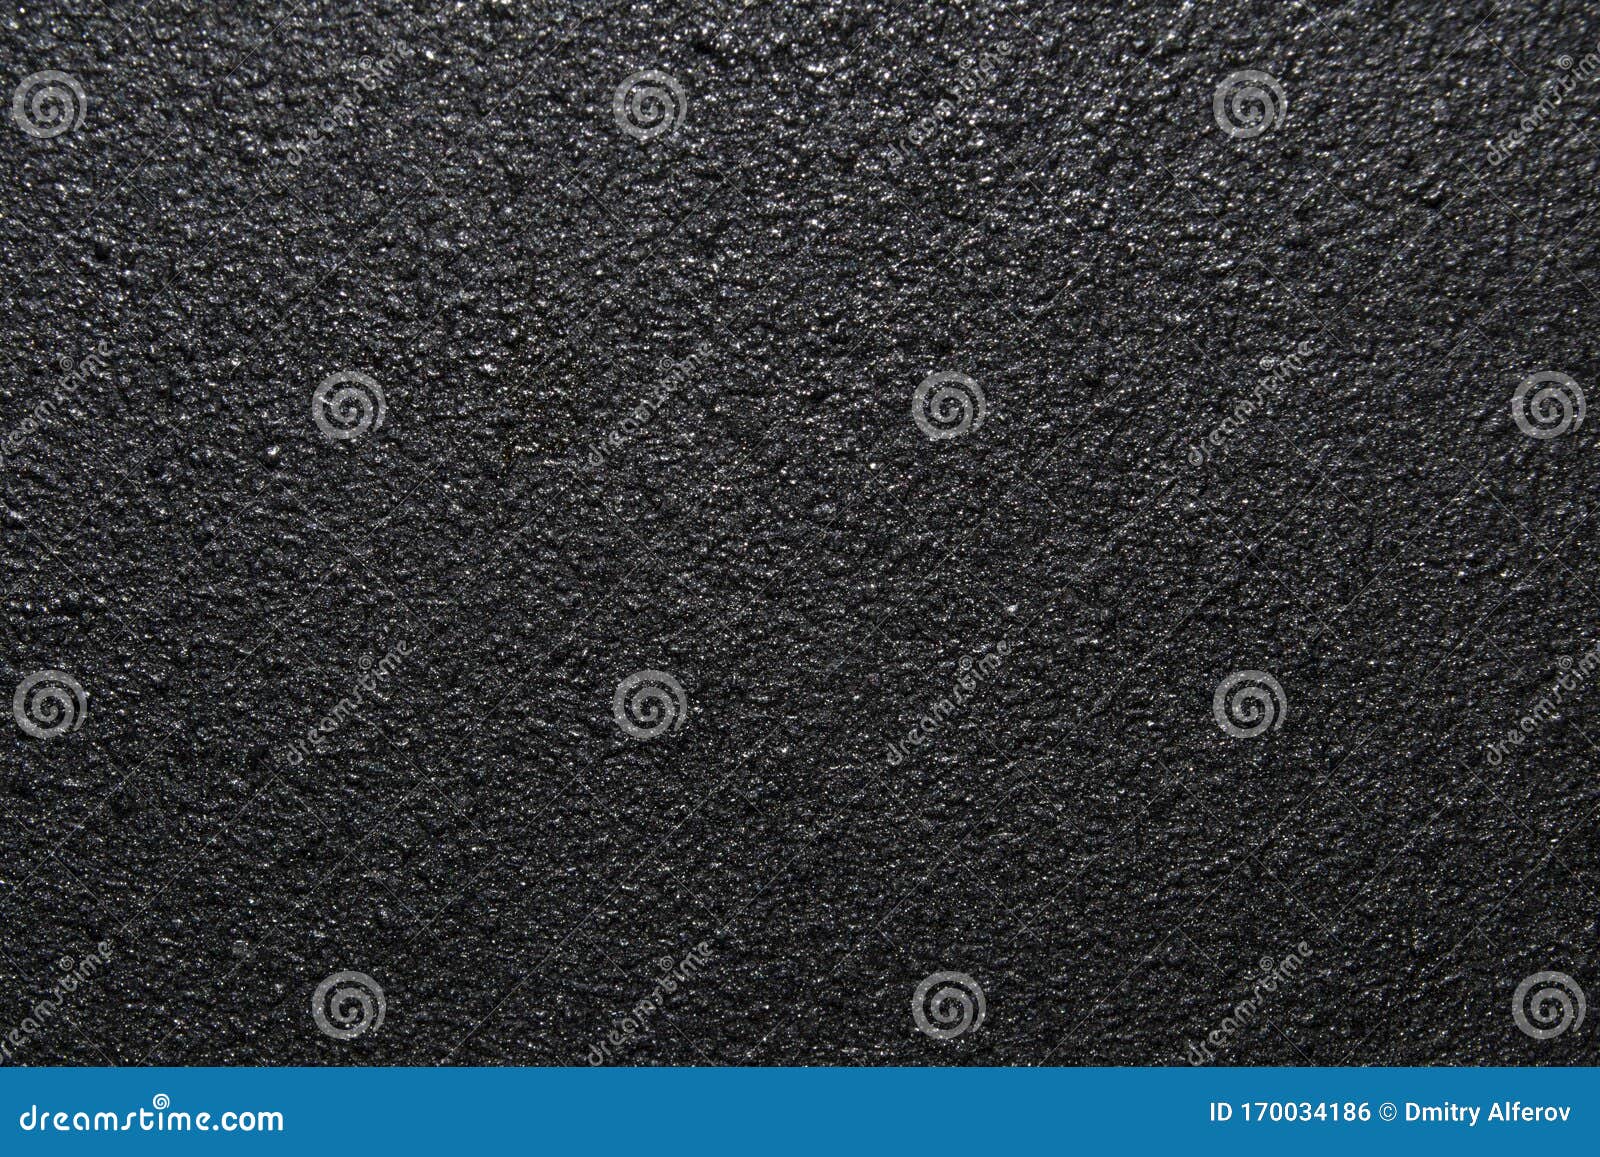 good view of rough cast iron texture background